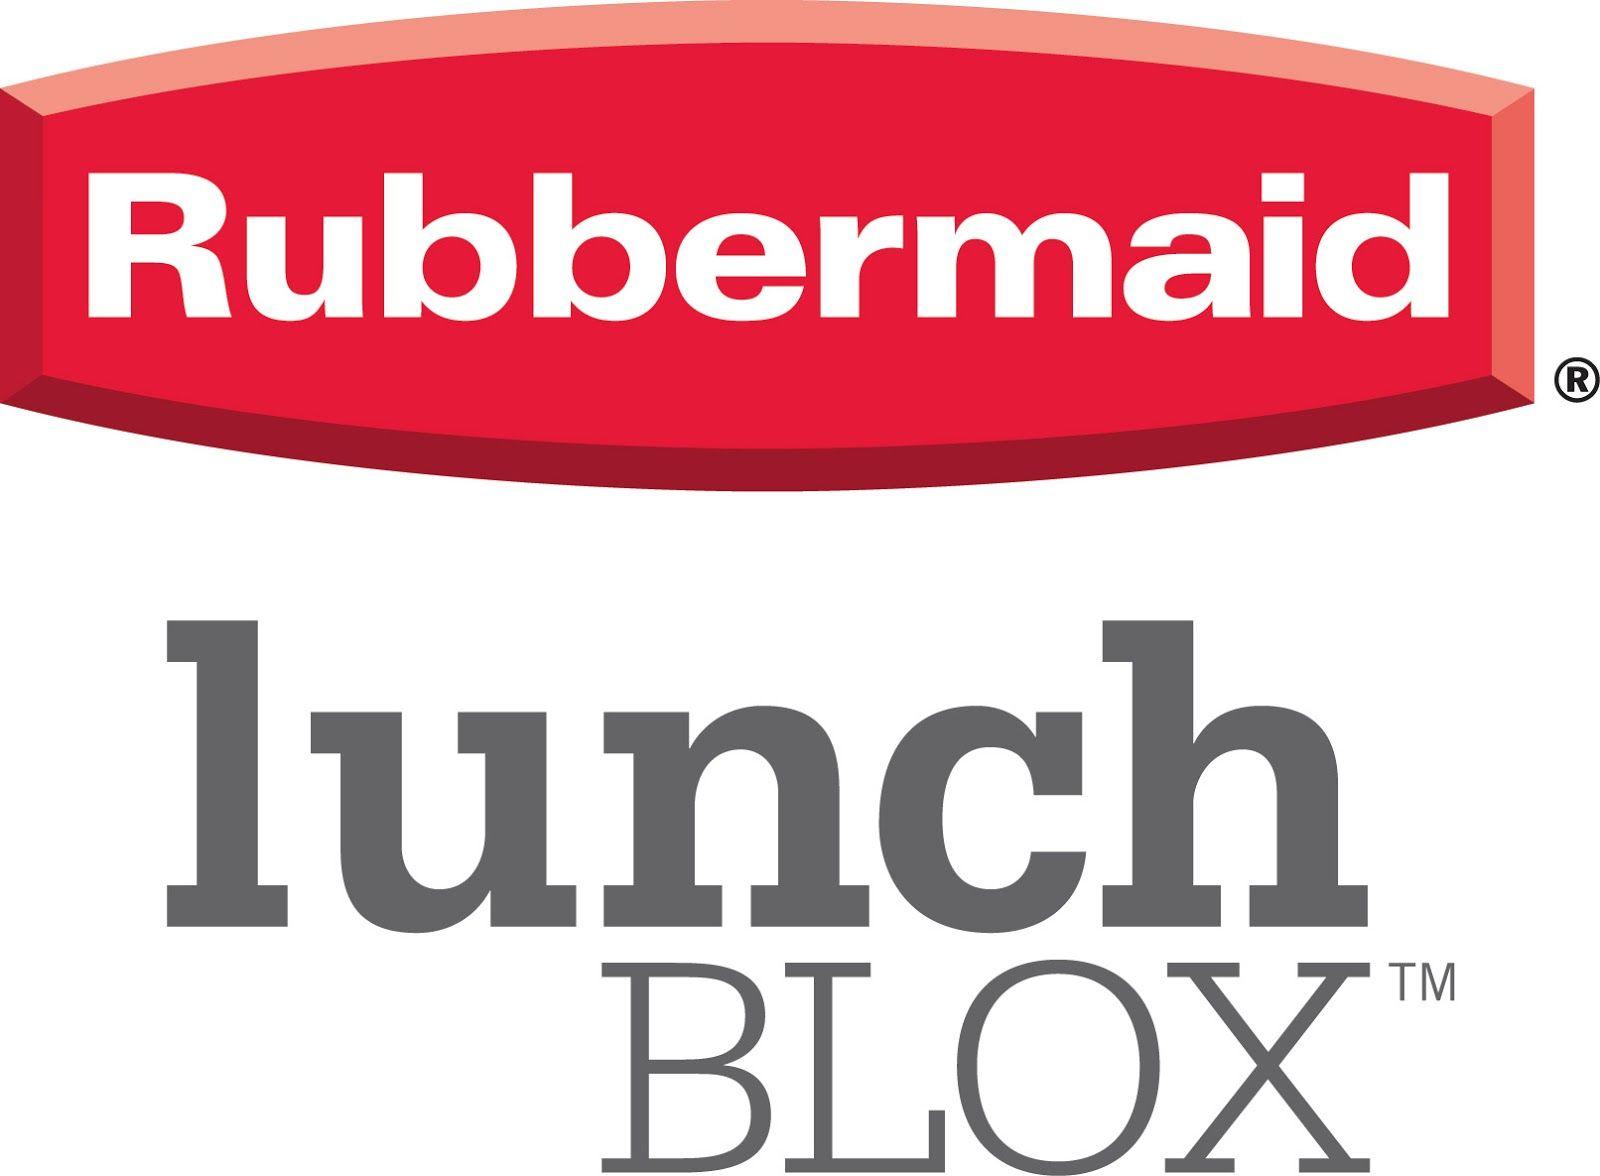 Rubbermaid Logo - Packing a Field Trip Aprroved Snack #ad #BetterInASnap